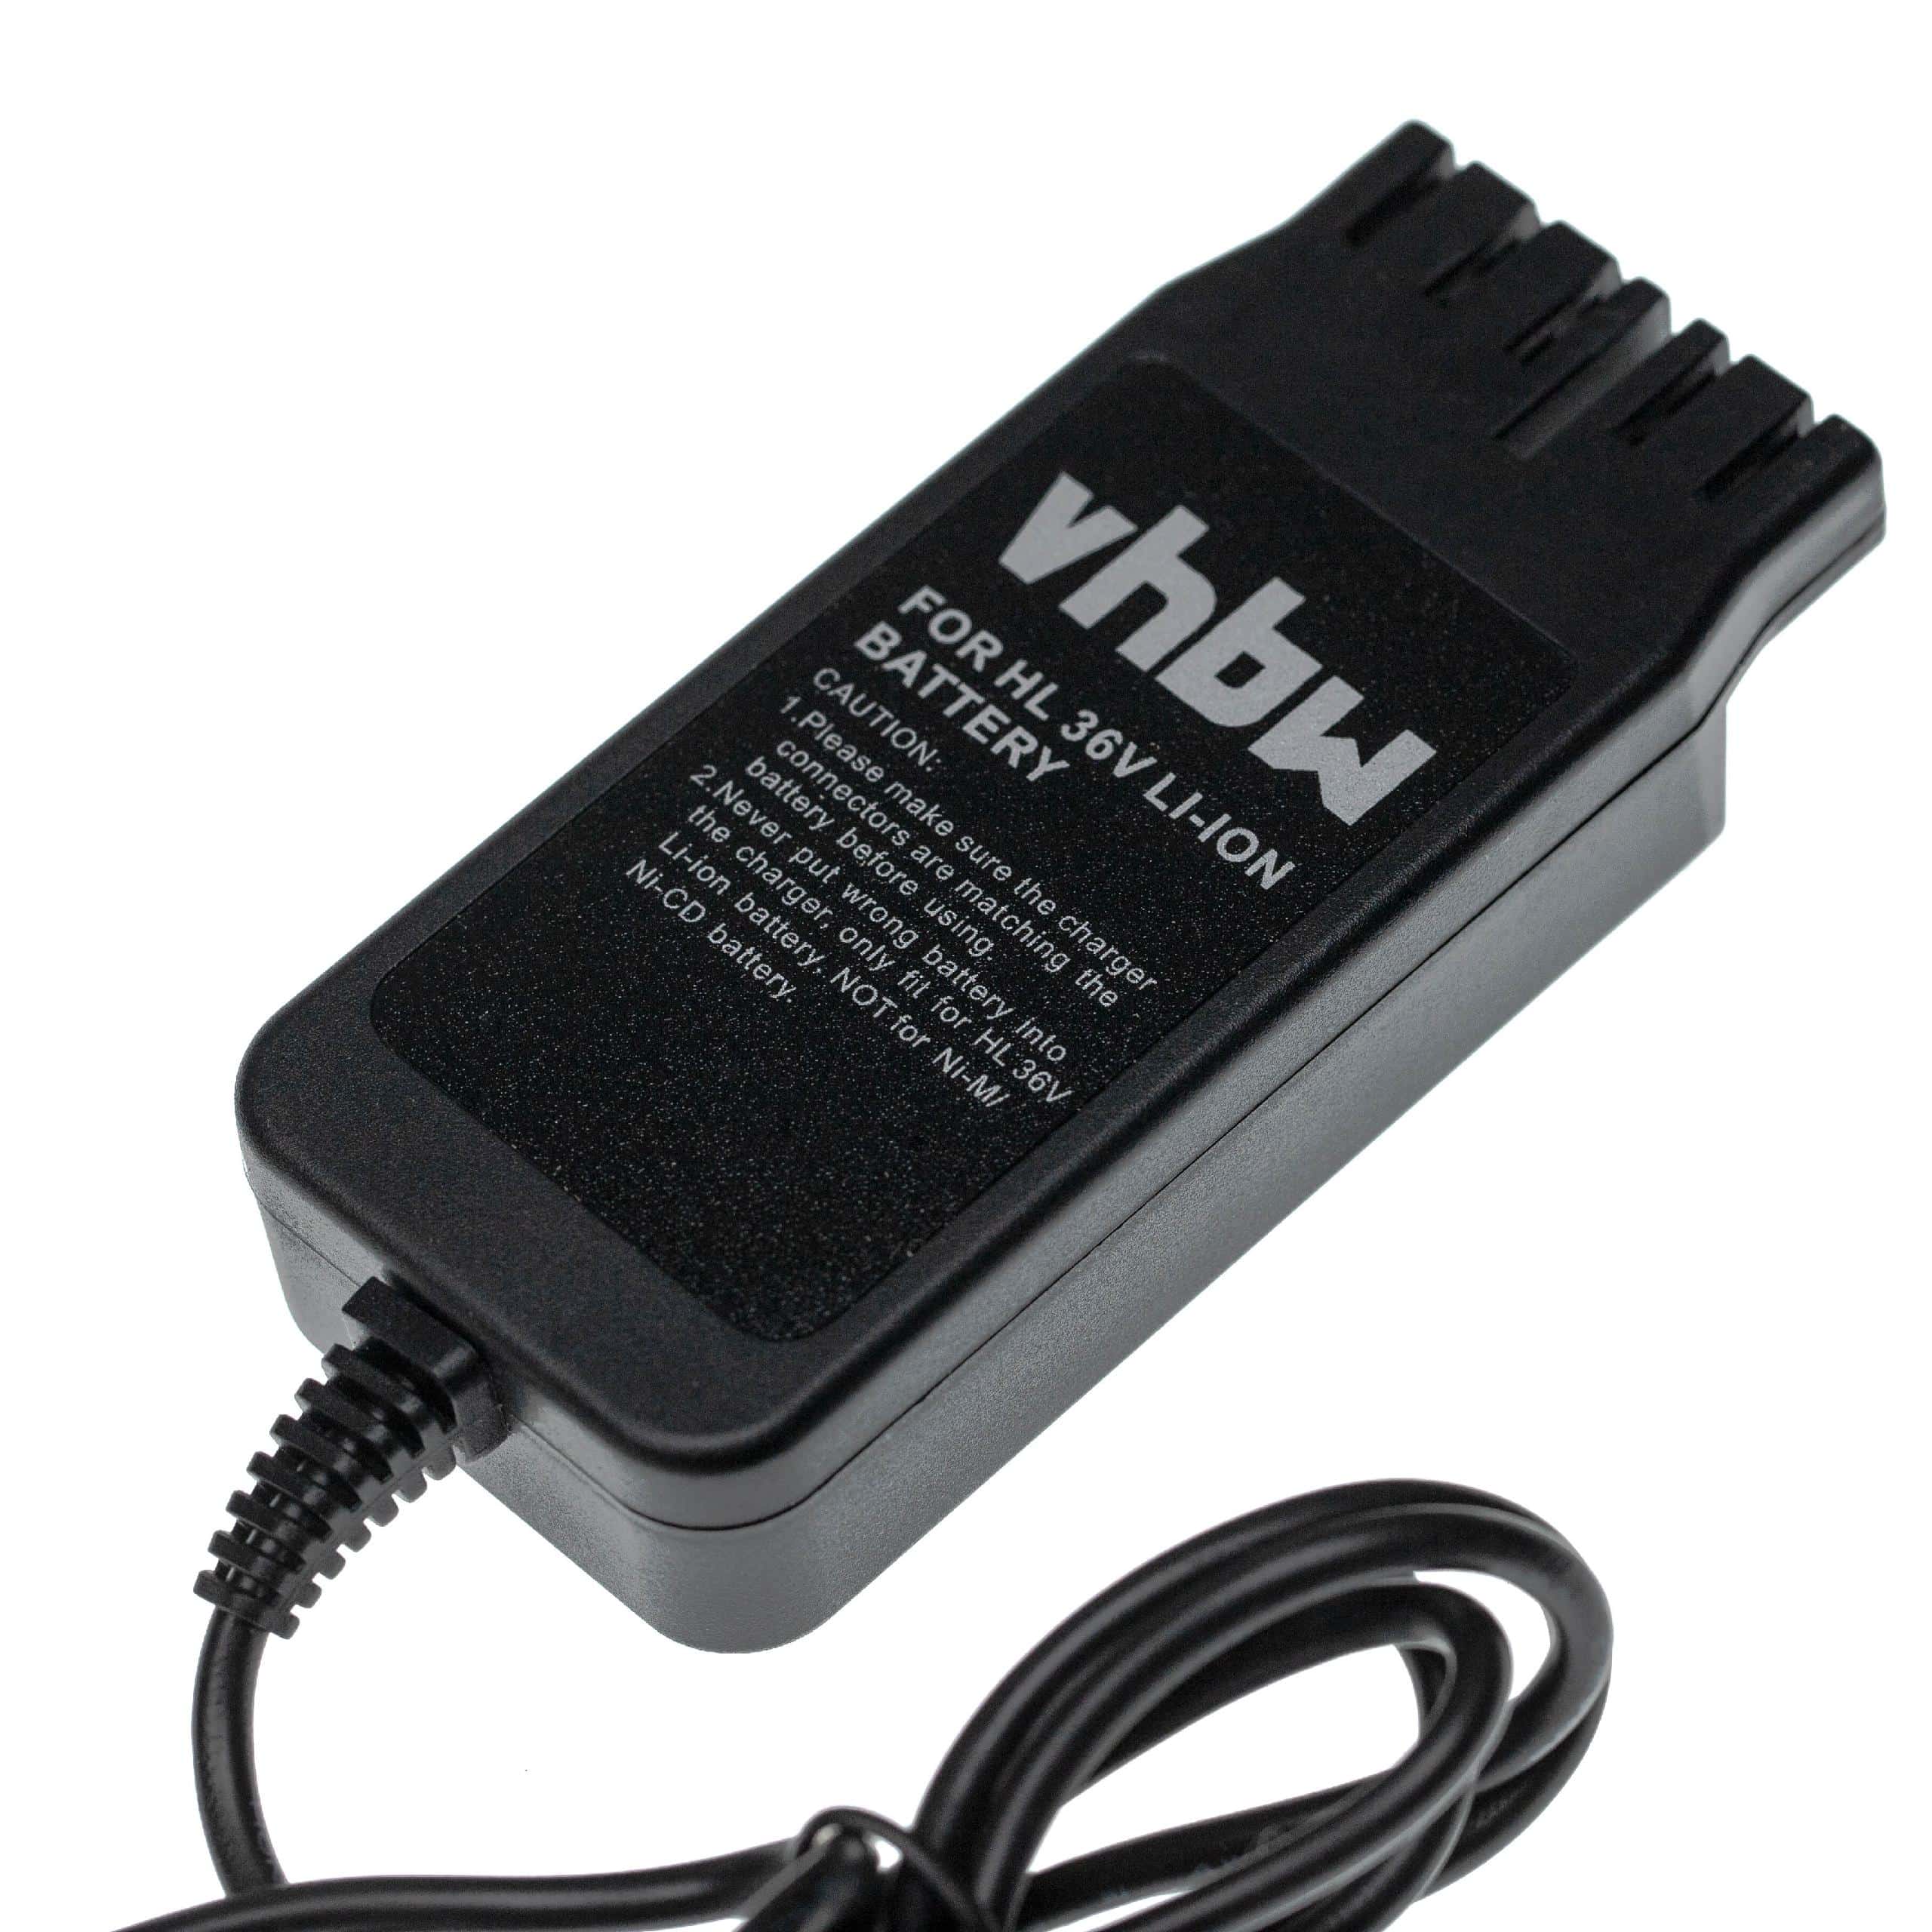 Charger incl. Mains Adapter suitable for B36 , Hilti B36 Power Tool Batteries etc. Li-Ion 36V